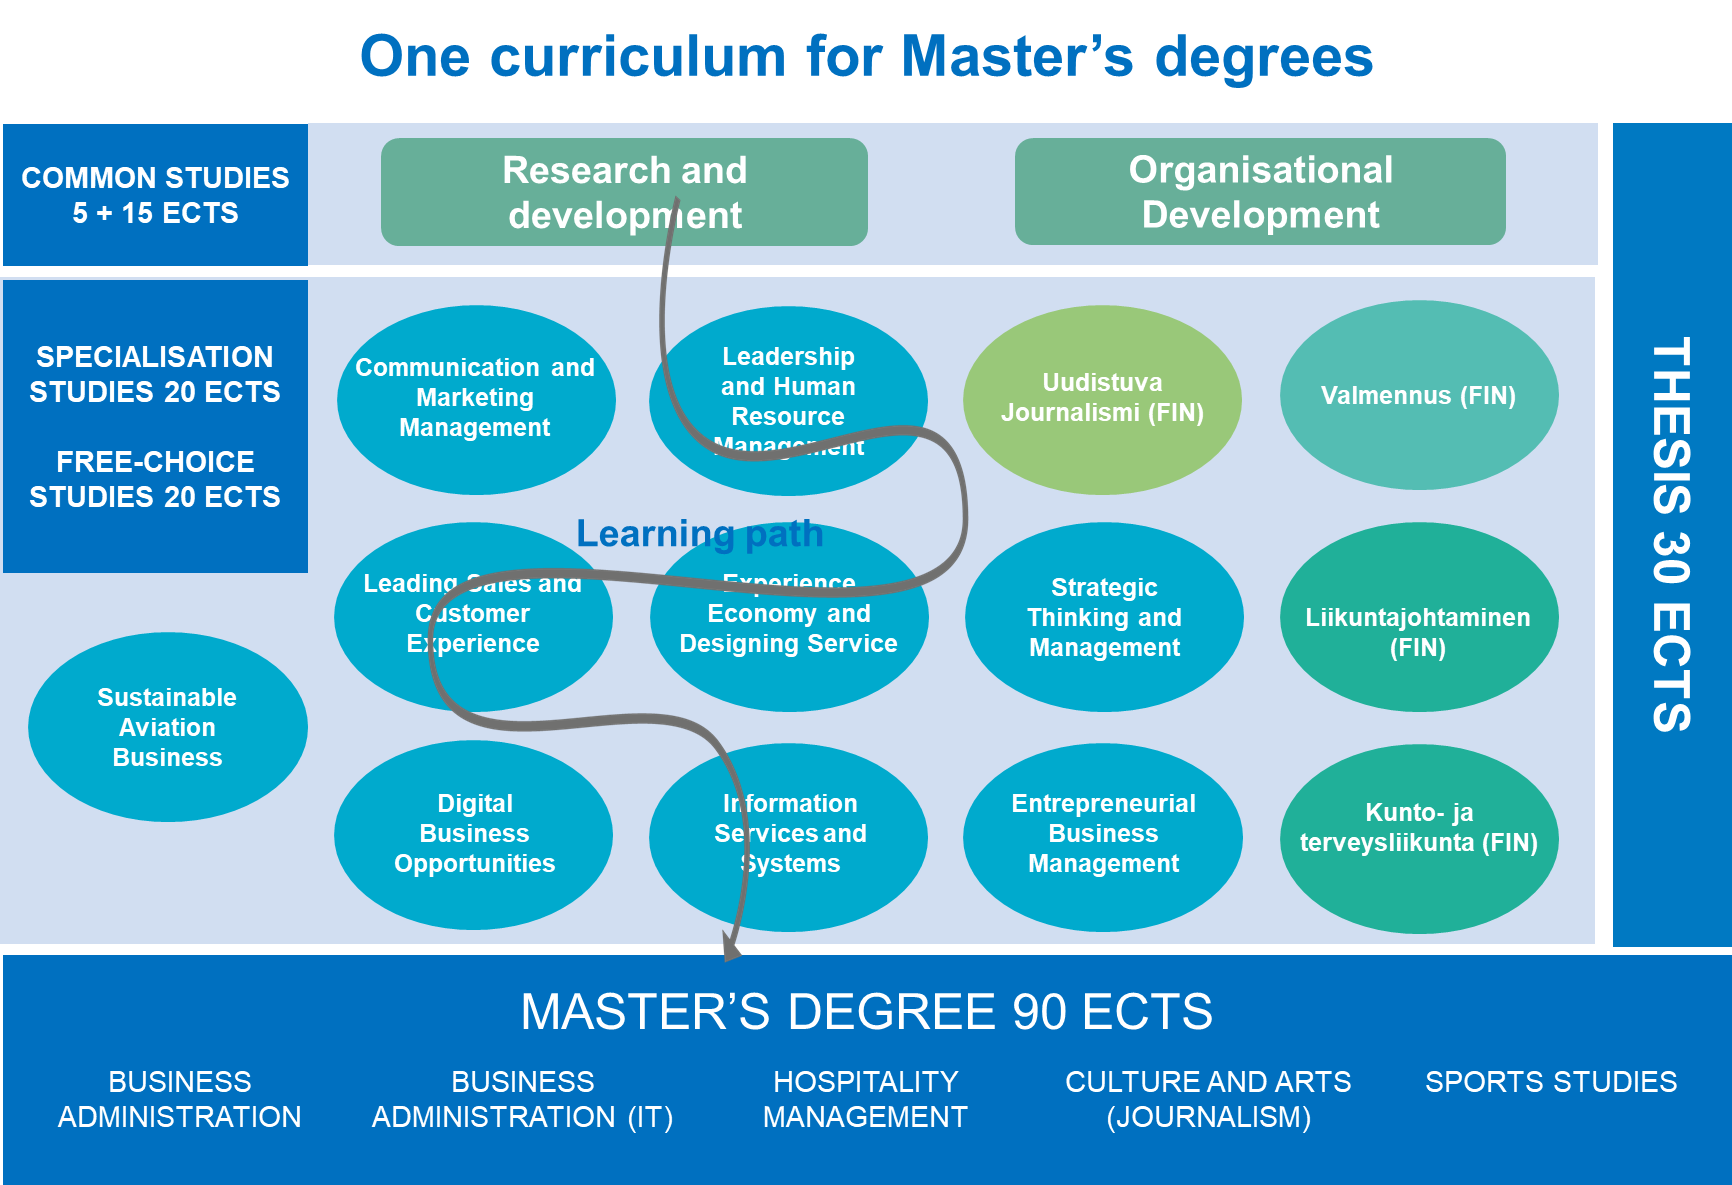 Picture 7. One curriculum for Master’s degree